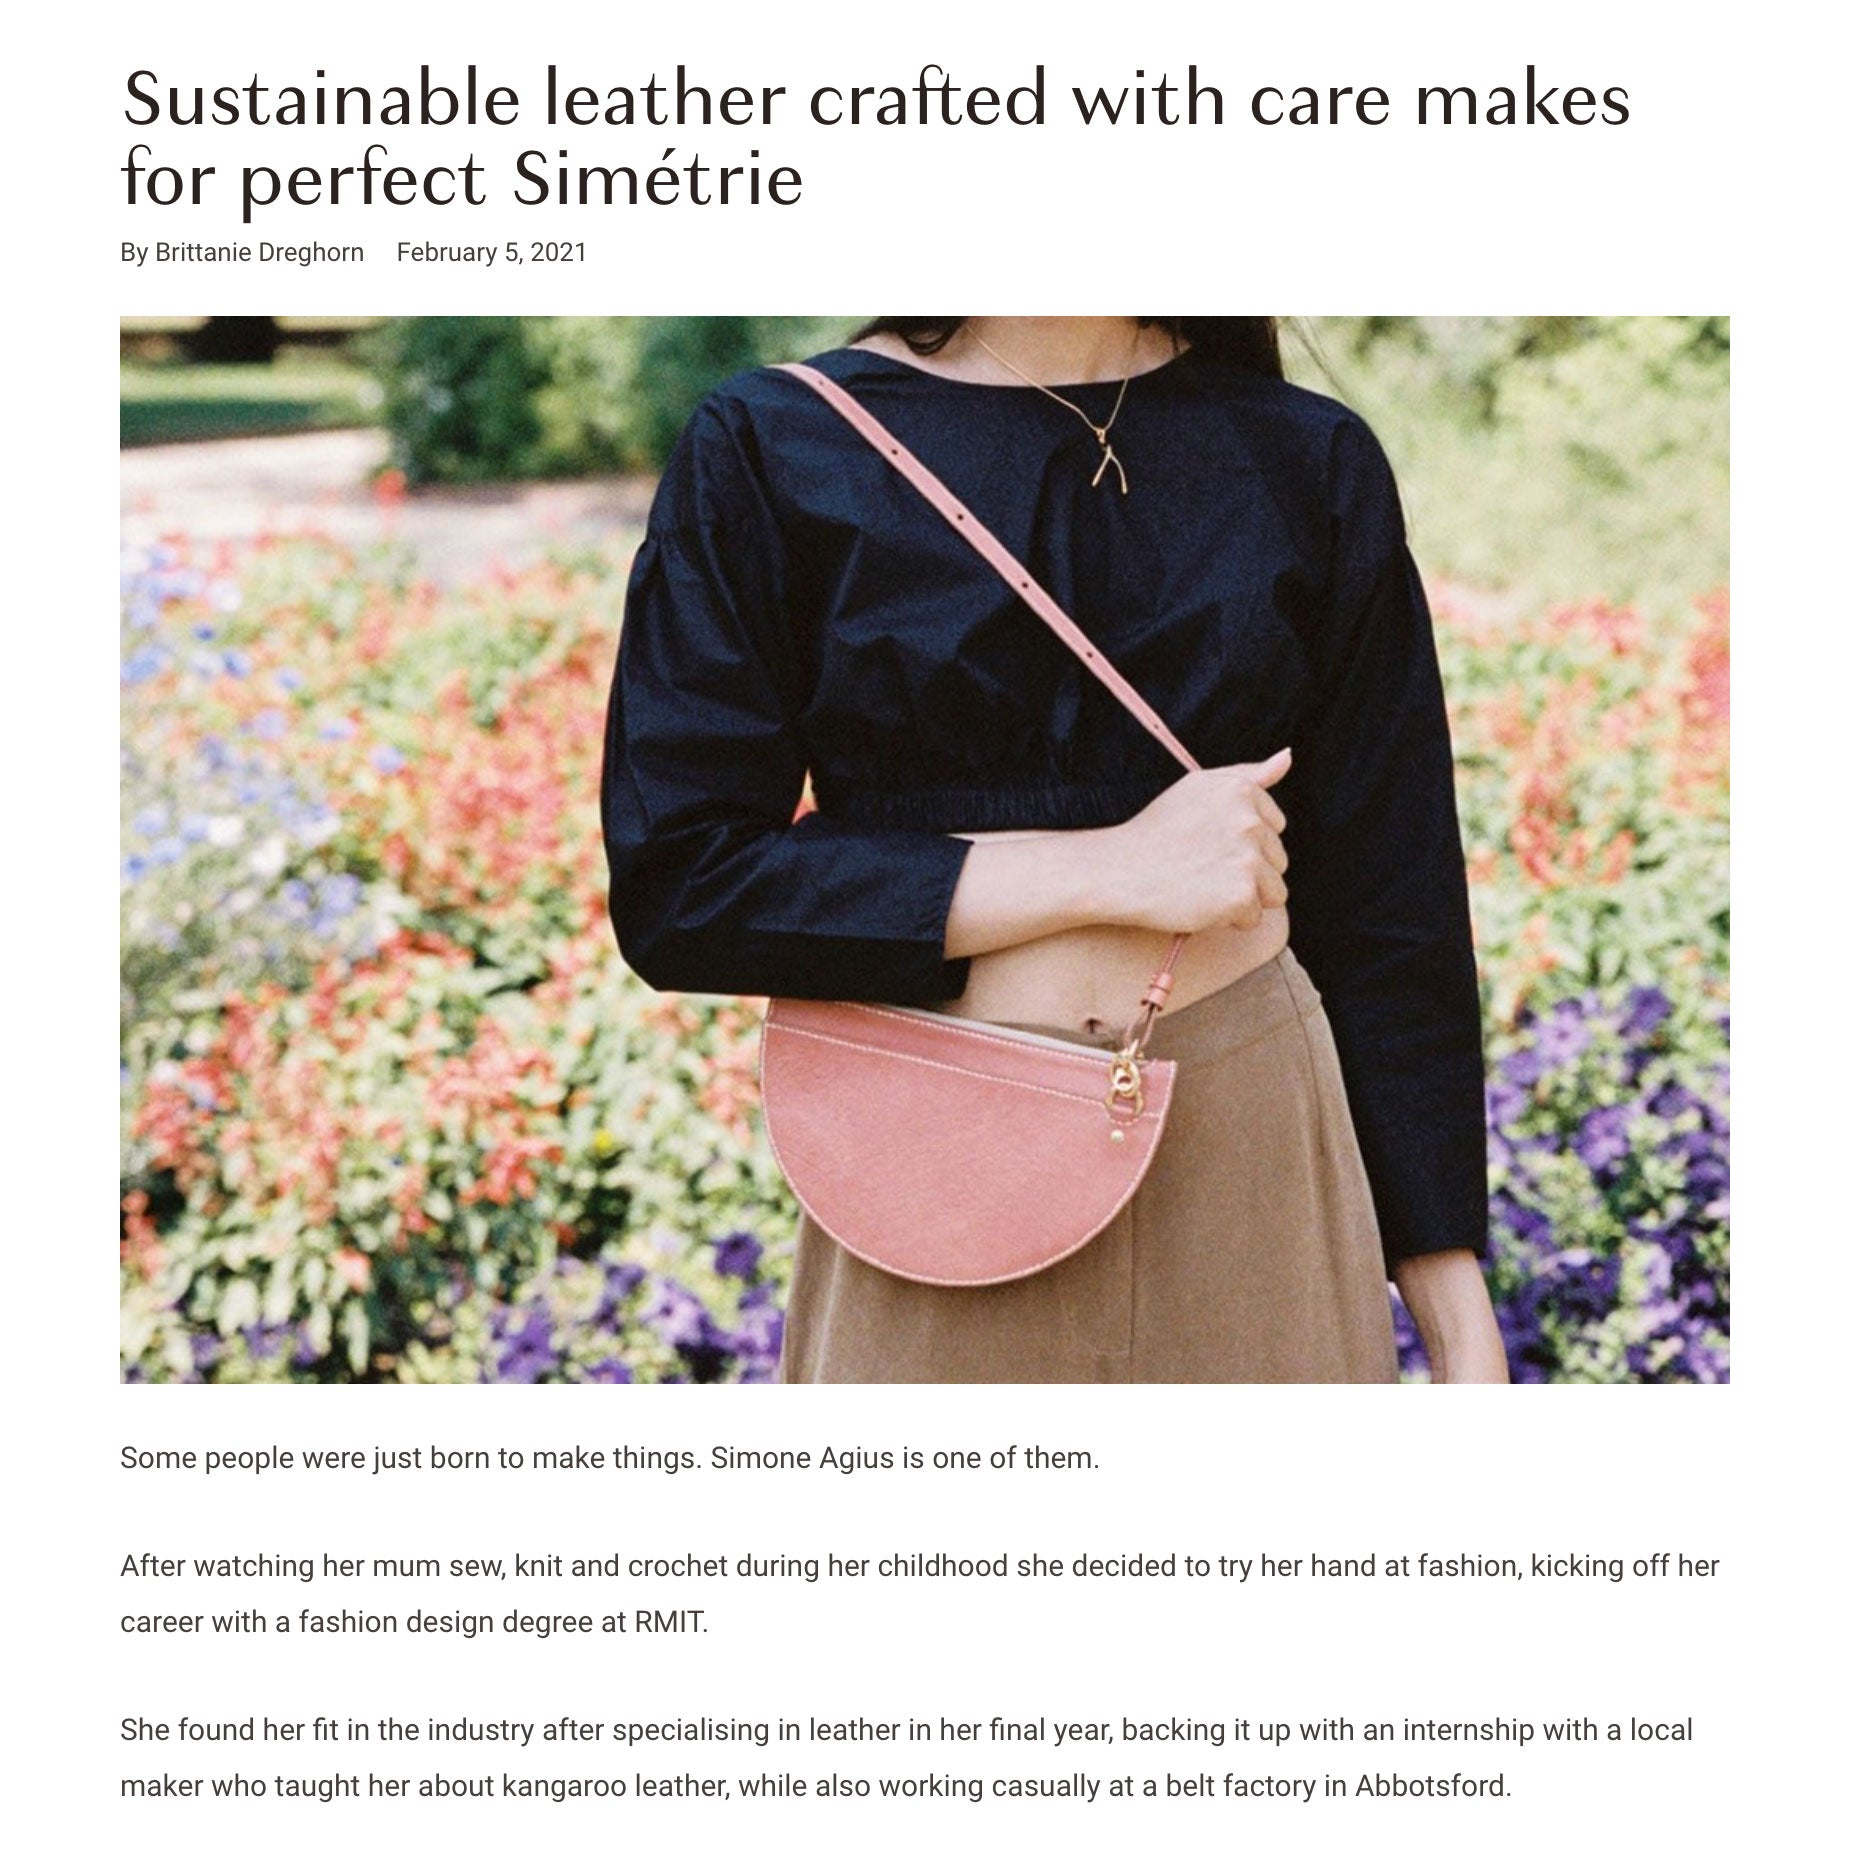 sustainable leather makes for perfect simétrie, as featured on Britt's List